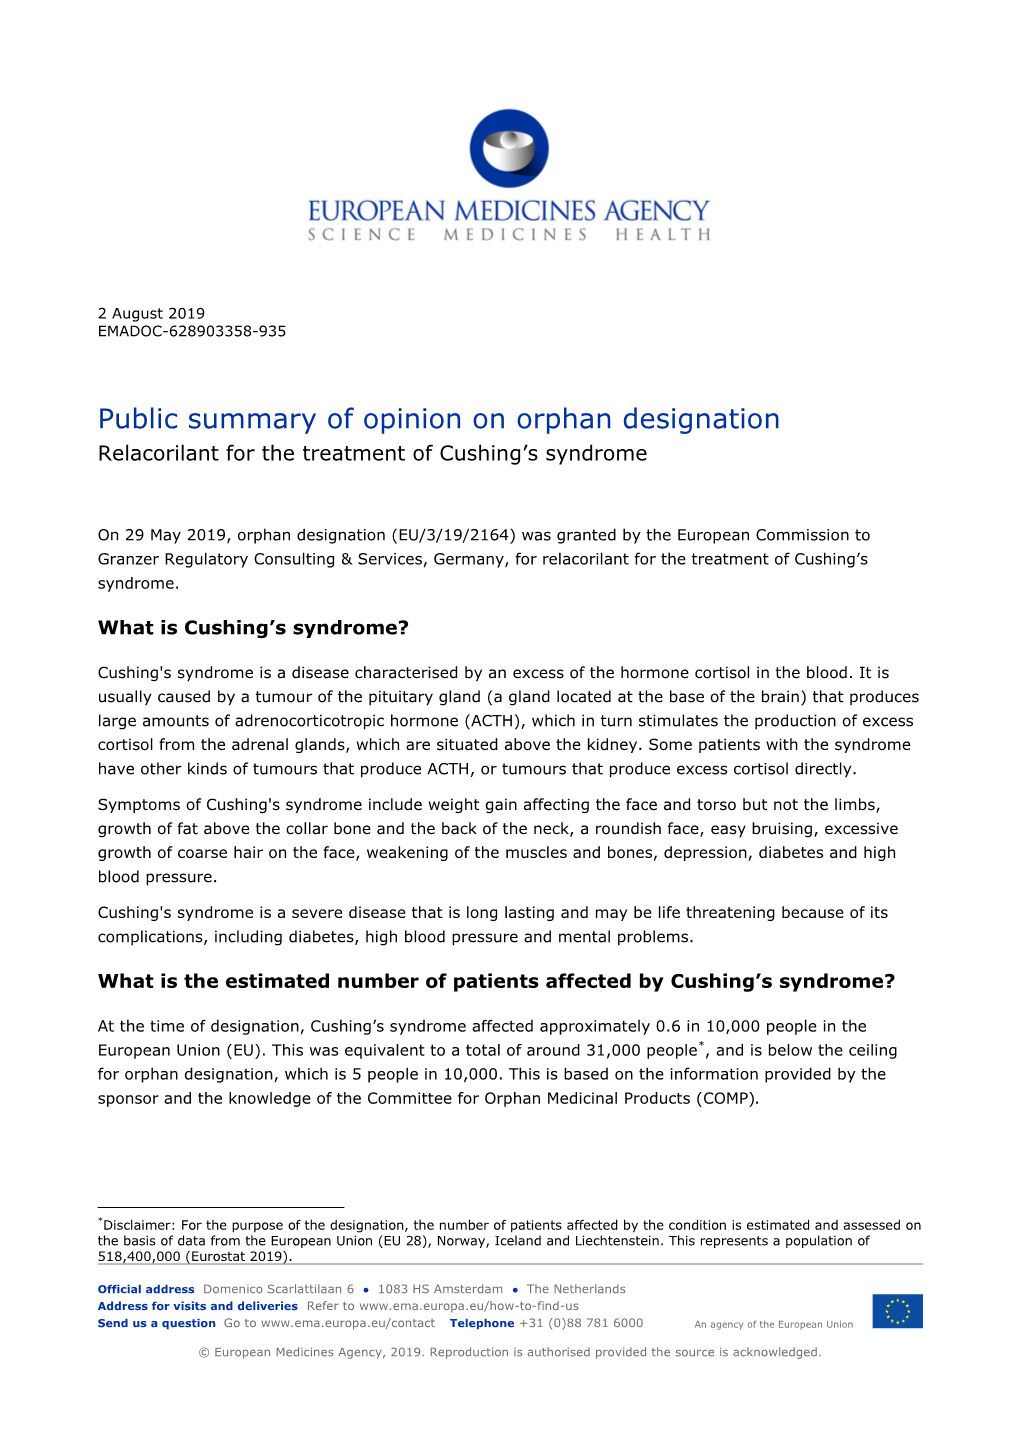 Public Summary of Opinion on Orphan Designation Relacorilant for the Treatment of Cushing’S Syndrome